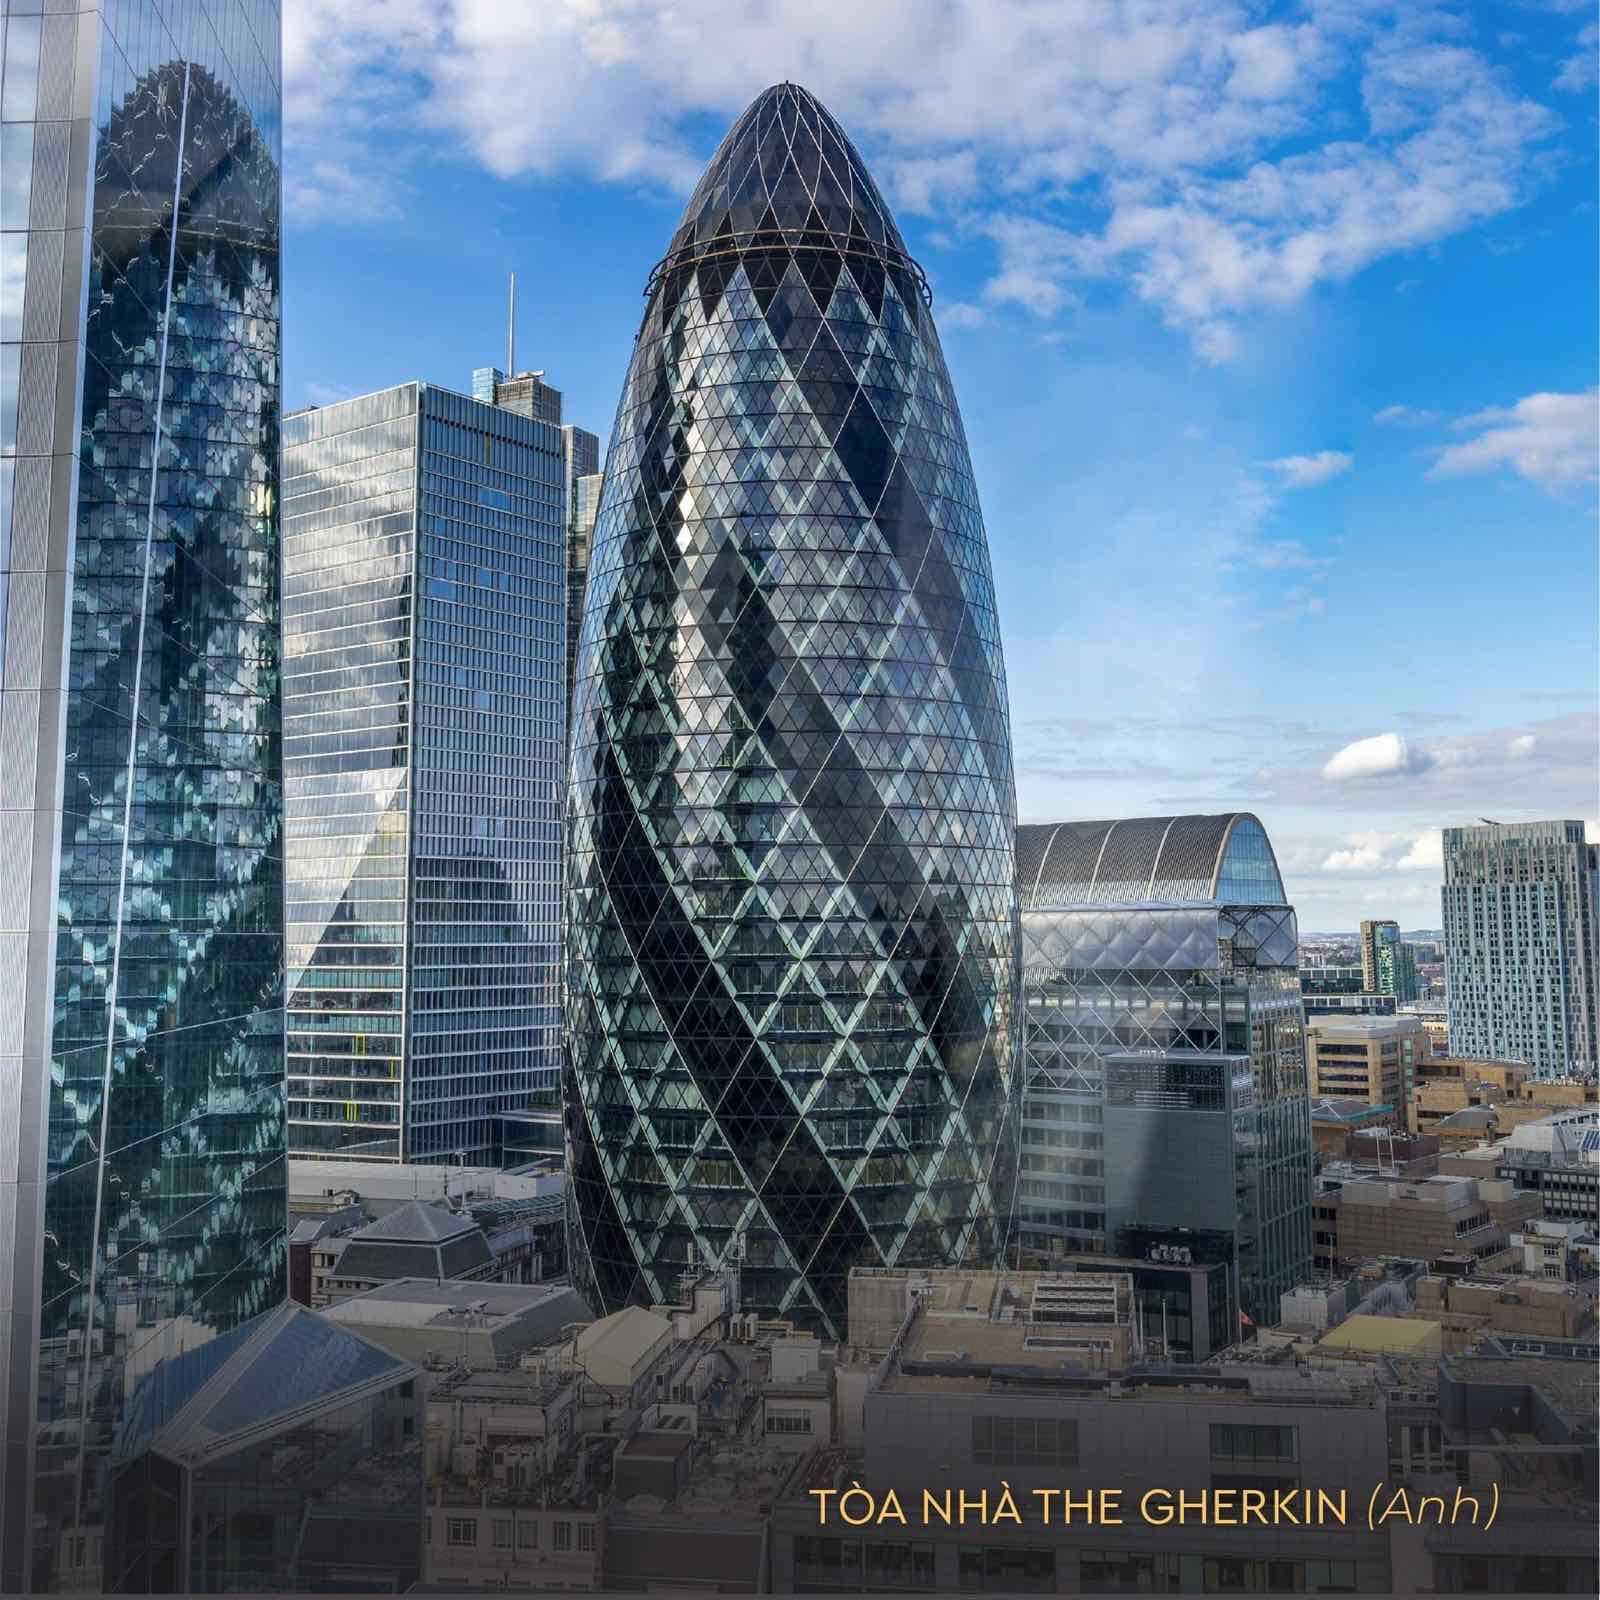 The Gherkin Building in England